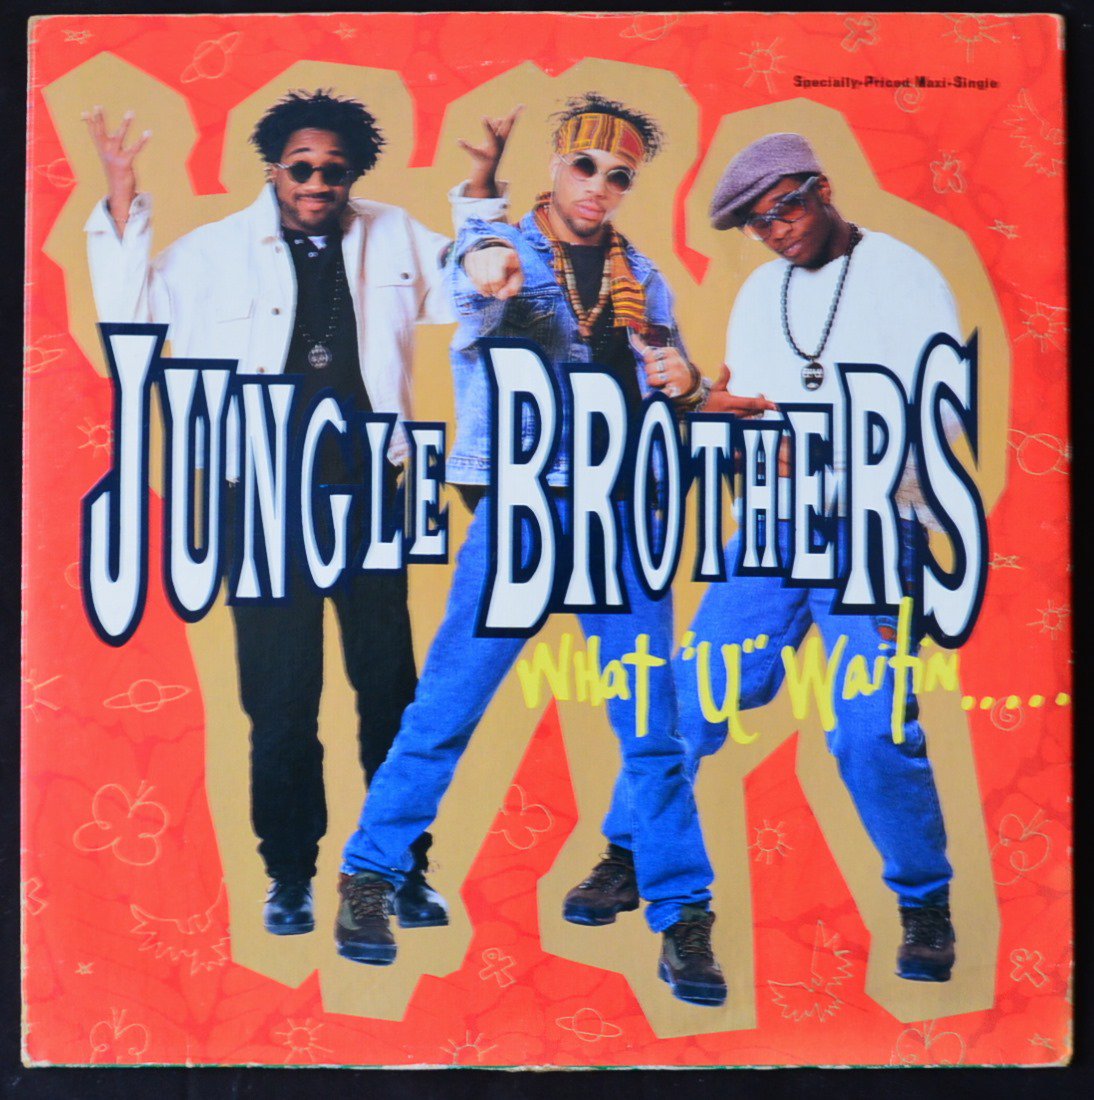 JUNGLE BROTHERS / WHAT 